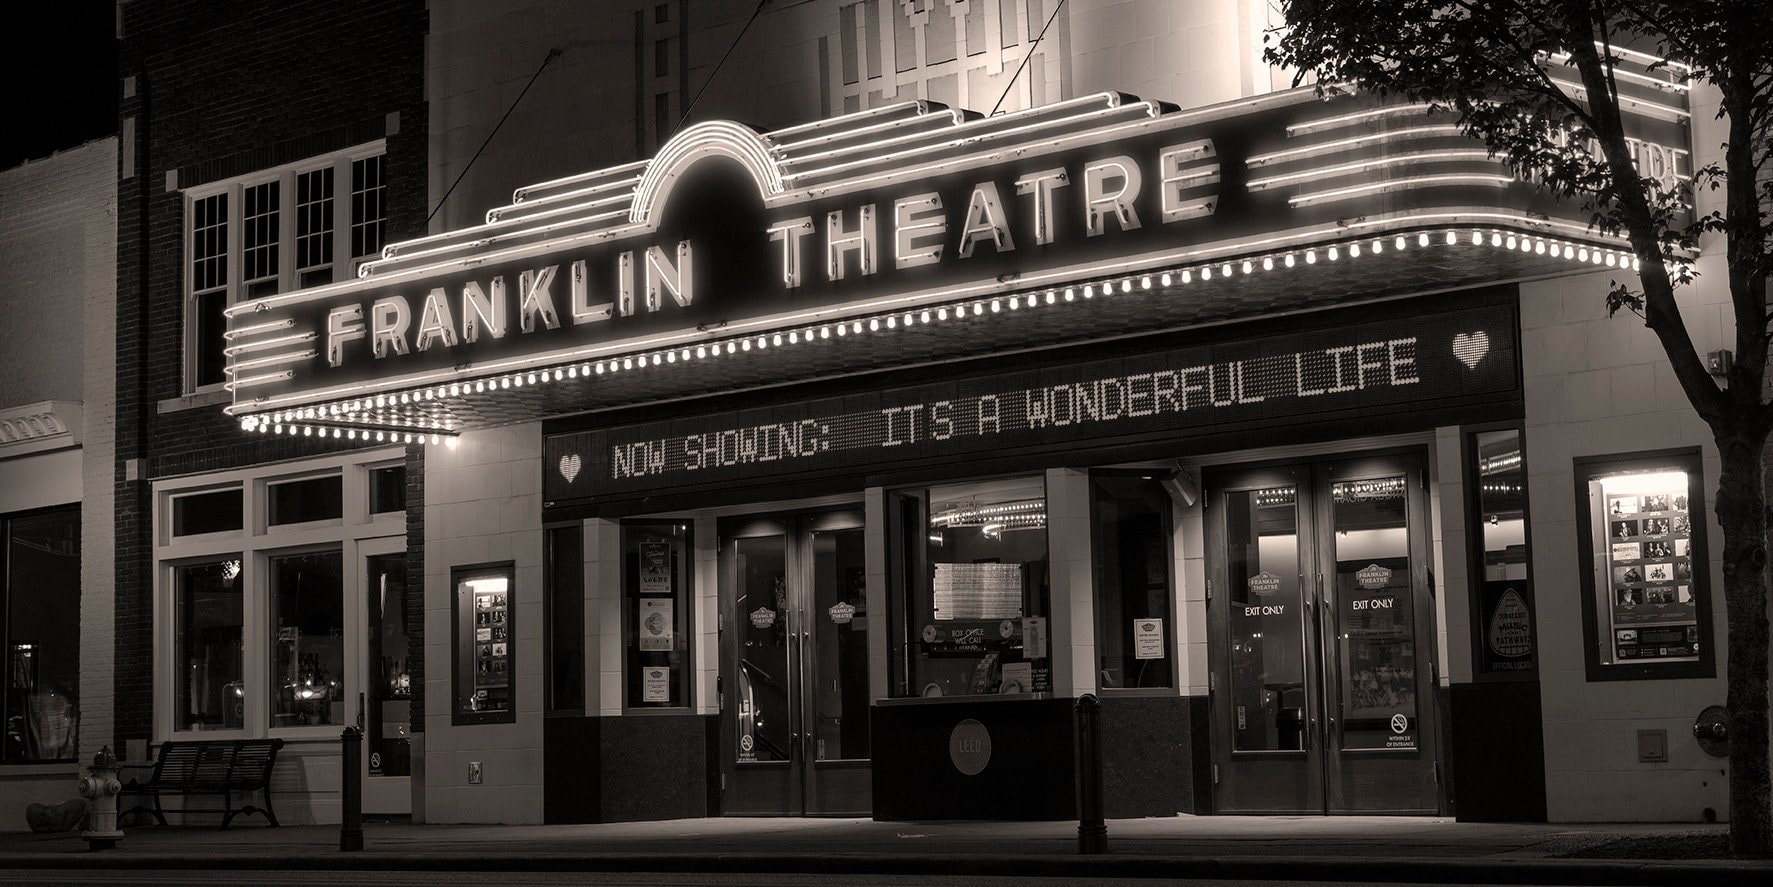 Franklin Theatre | It’s a Wonderful Life Tennessee Wall Art Christmas Edition Classic Movie Canvas Metal Photography Prints